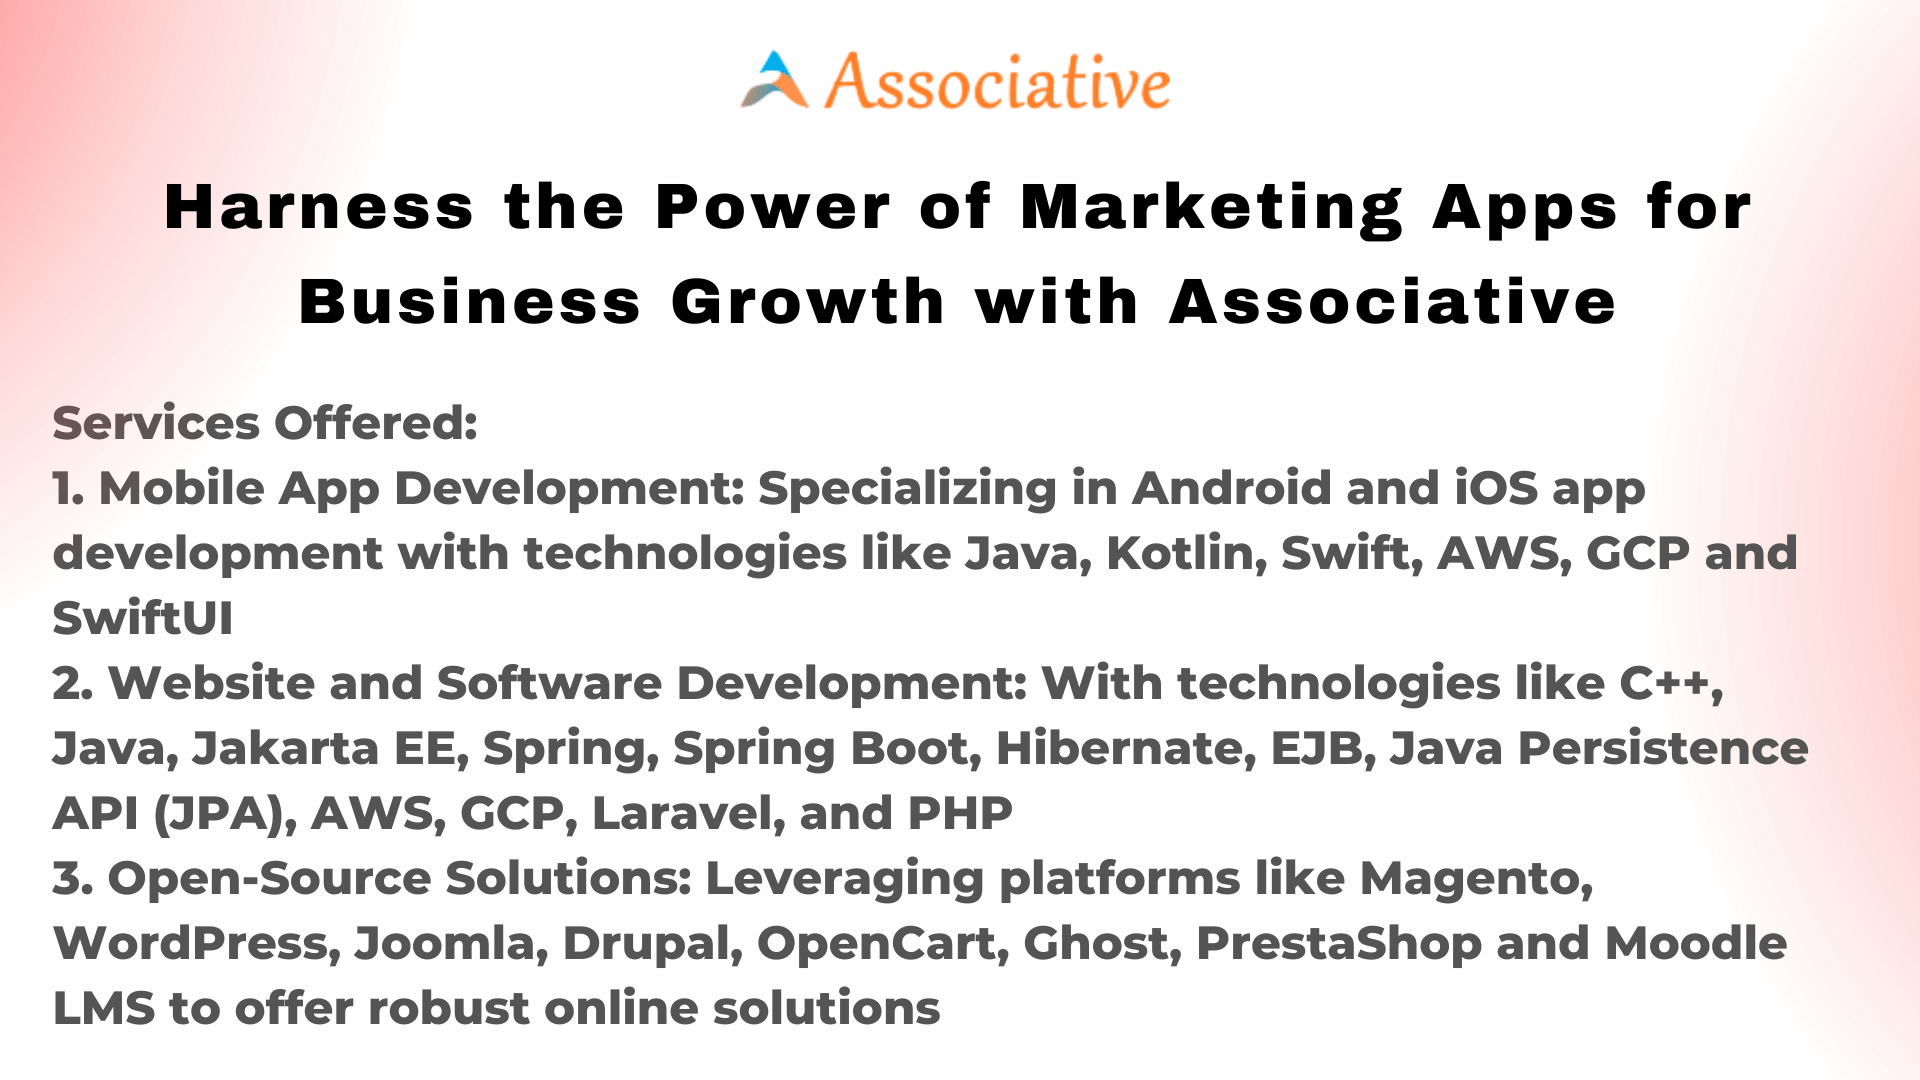 Harness the Power of Marketing Apps for Business Growth with Associative